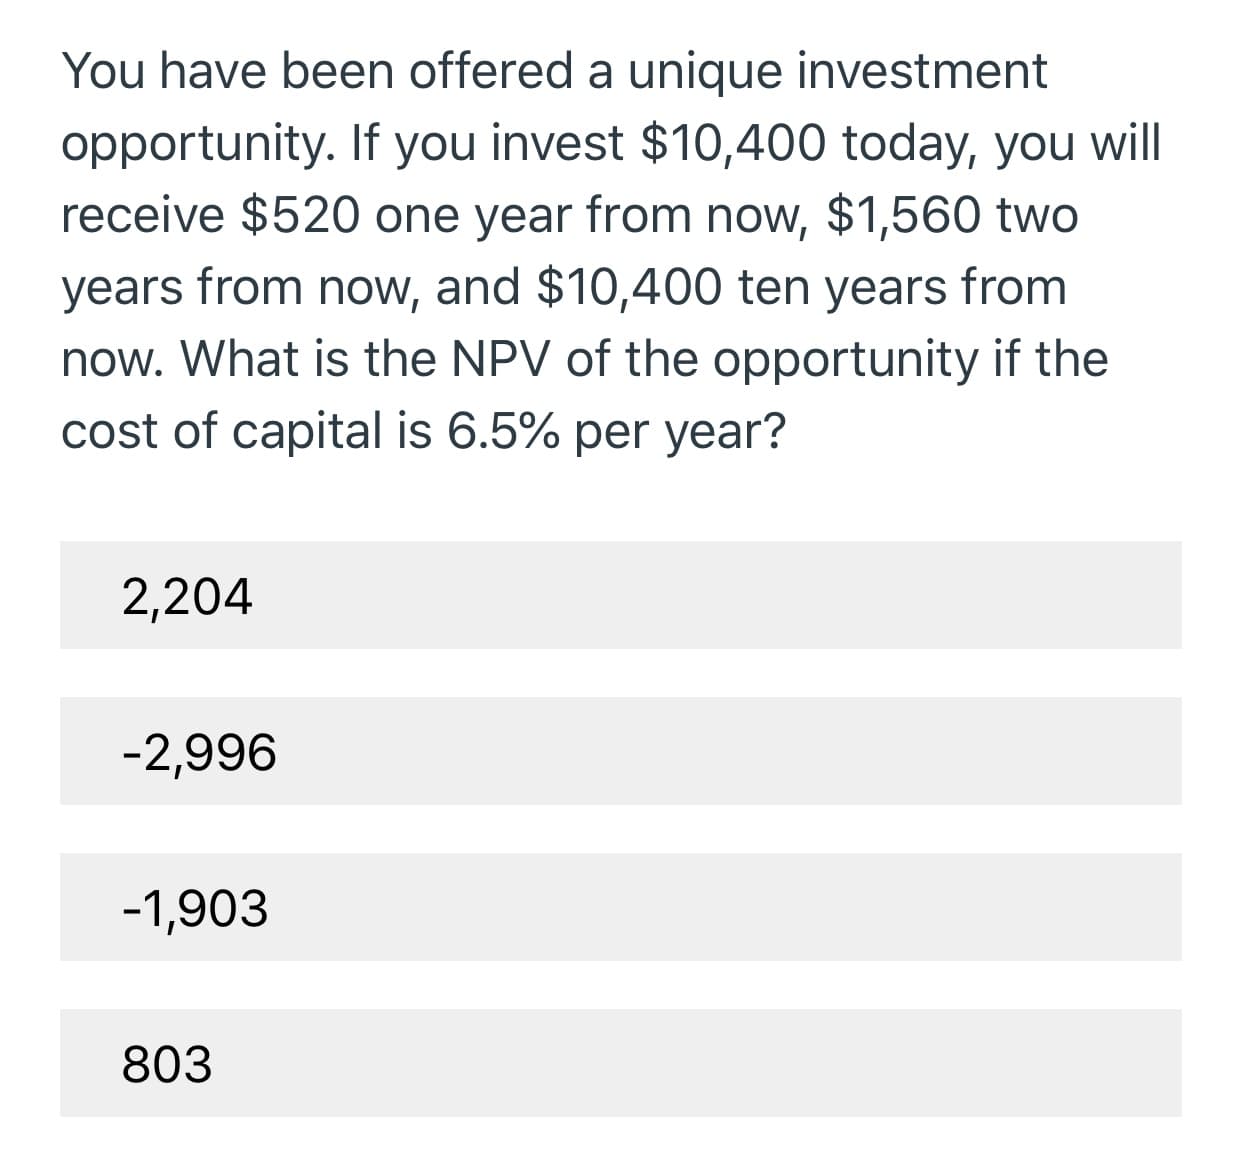 You have been offered a unique investment
opportunity. If you invest $10,400 today, you will
receive $520 one year from now, $1,560 two
years from now, and $10,400 ten years from
now. What is the NPV of the opportunity if the
cost of capital is 6.5% per year?
2,204
-2,996
-1,903
803
